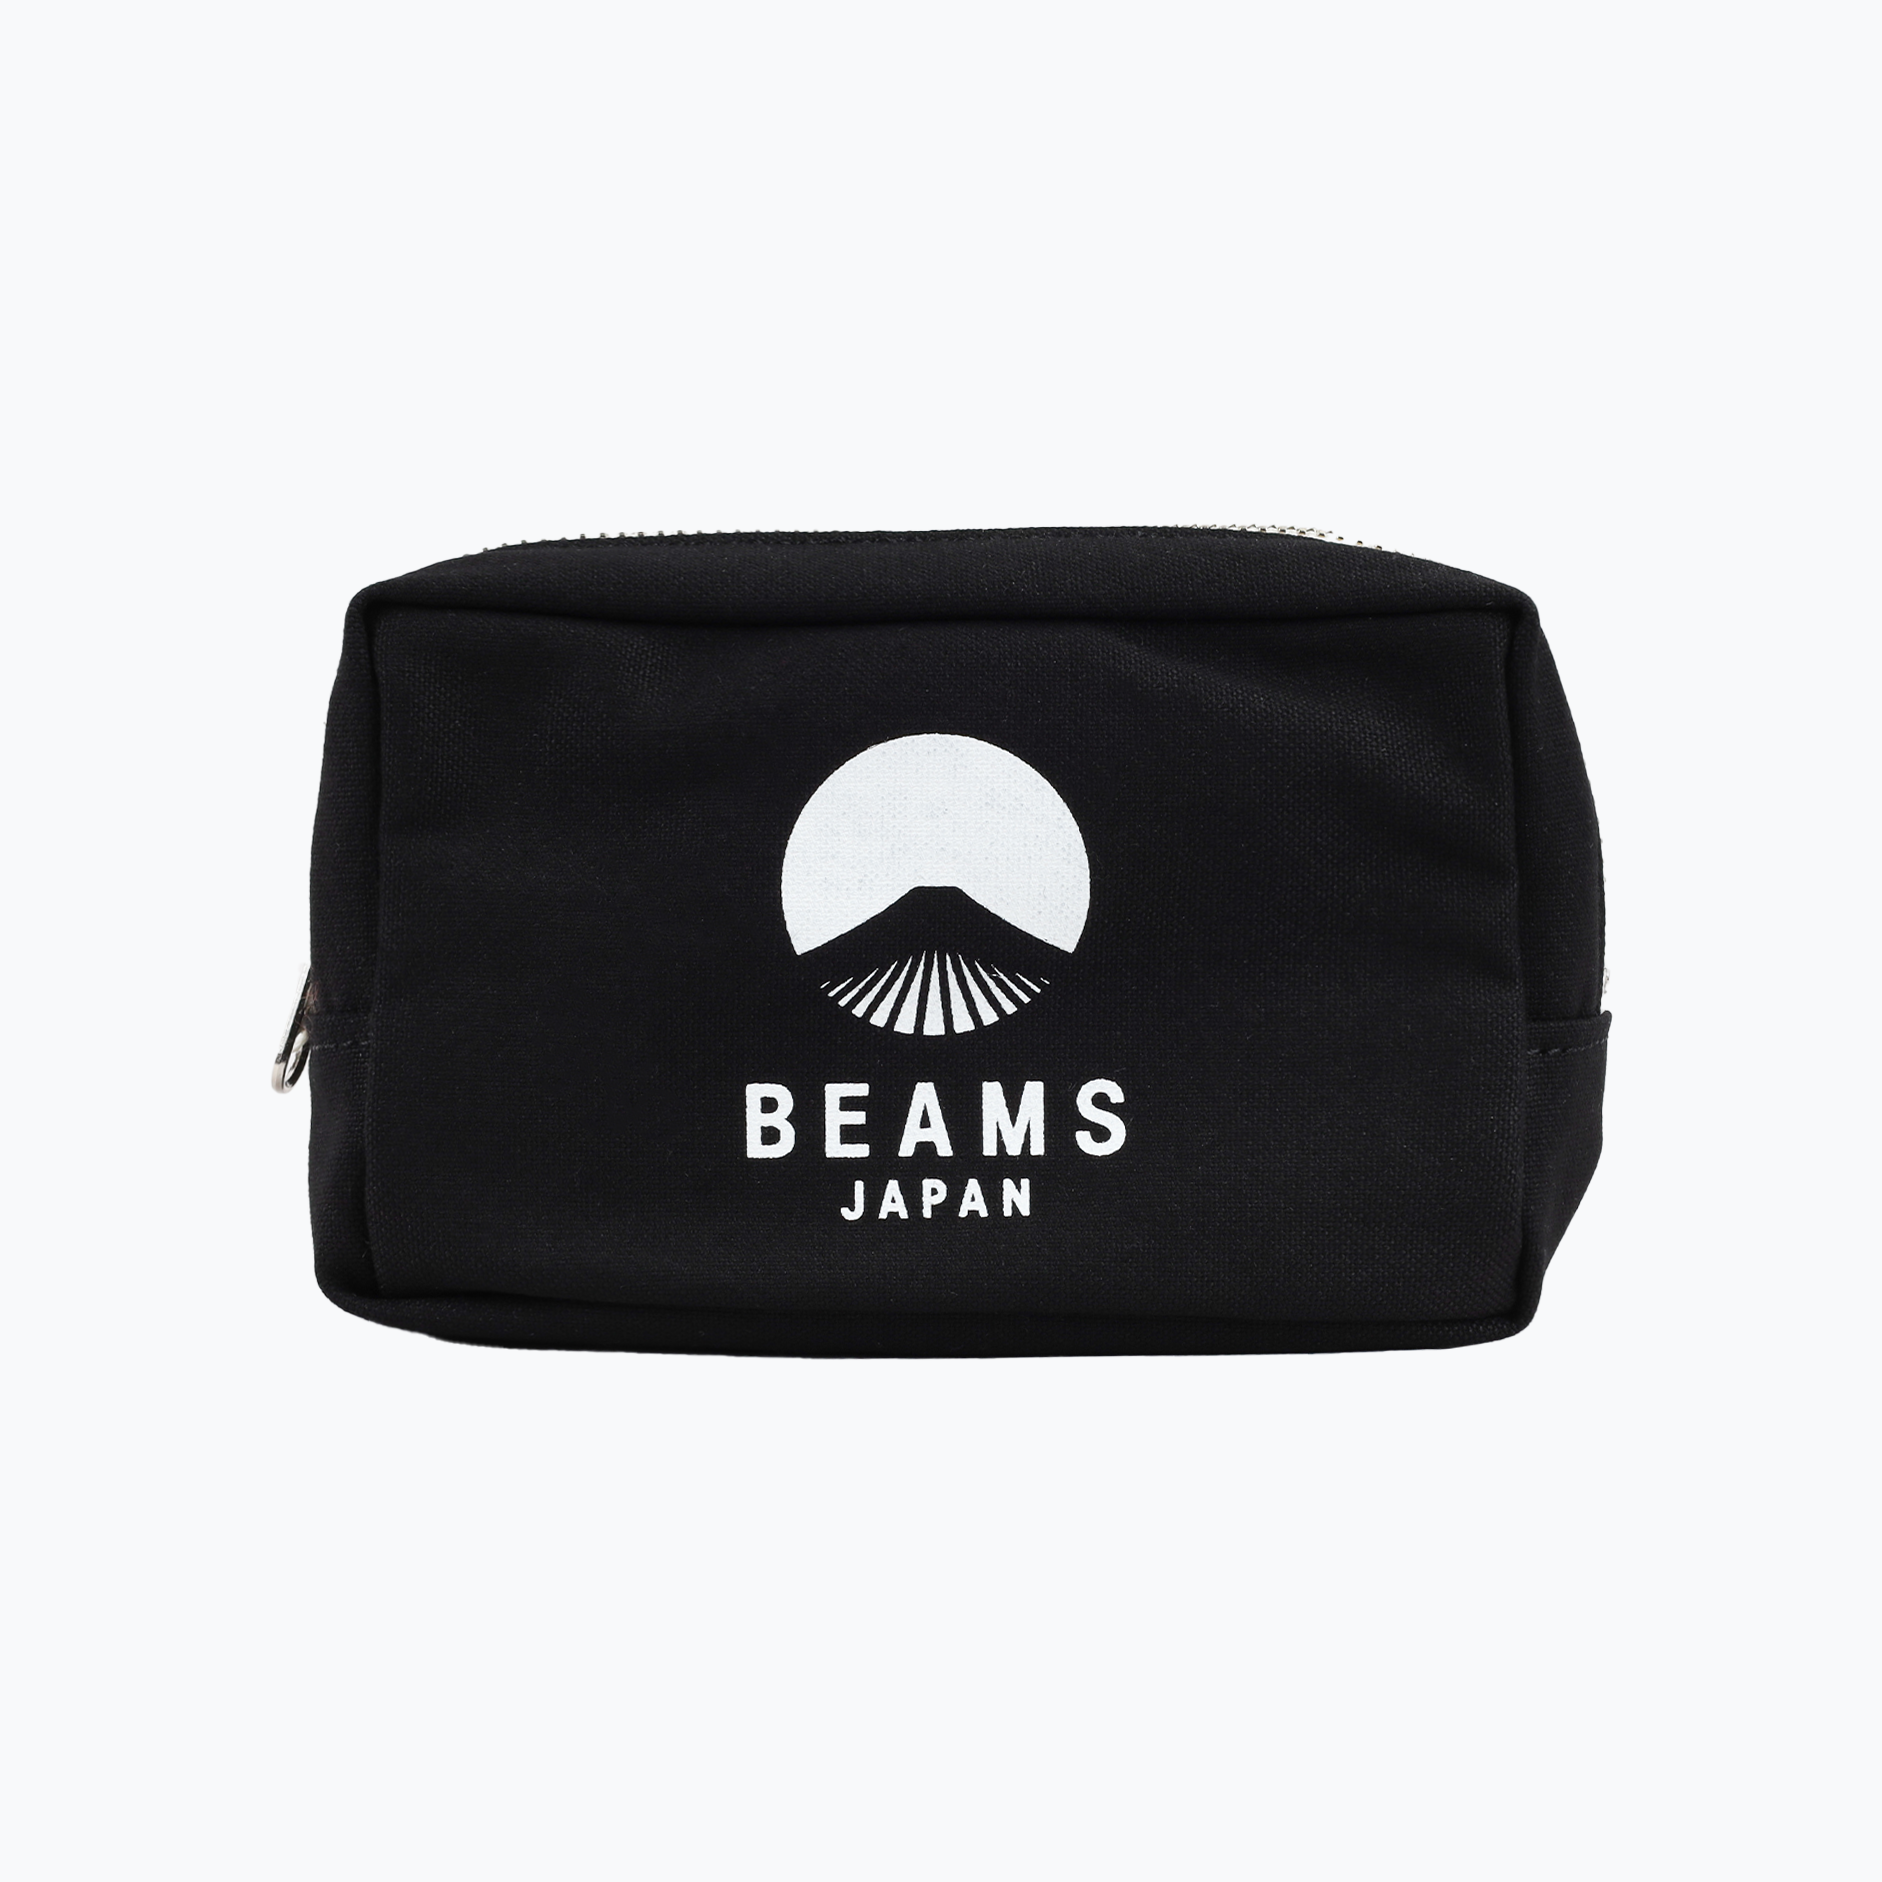 BEAMS JAPAN X EVERGREEN WORKS POUCH (M) - BLACK